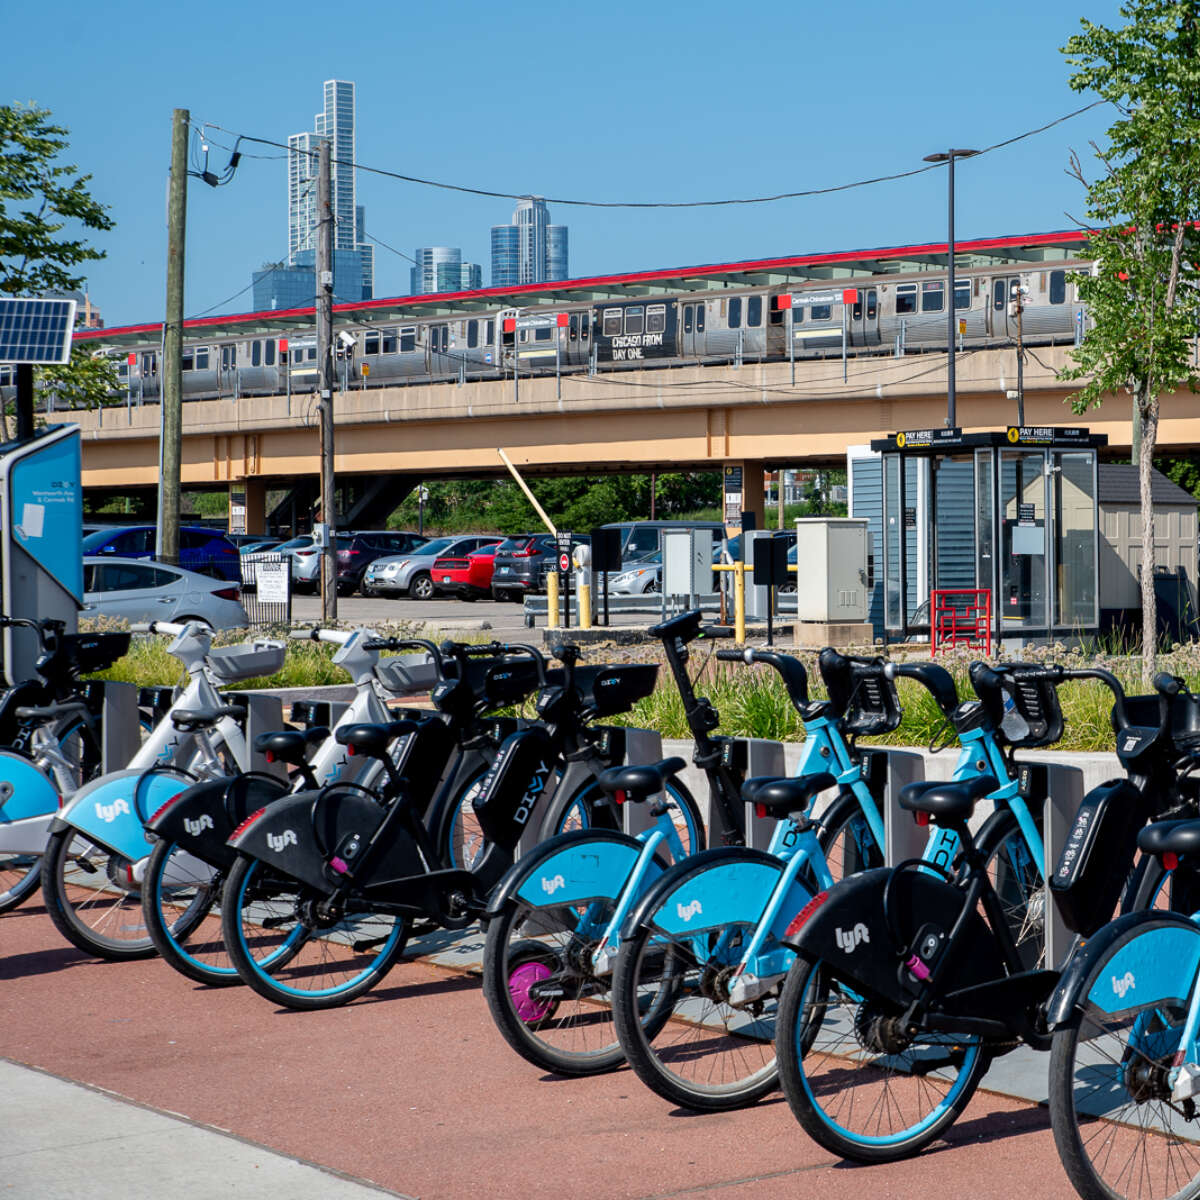 A Divvy bikeshare rack full of bikes with a CTA train at the Cermak Chinatown station and skyscrapers in the background